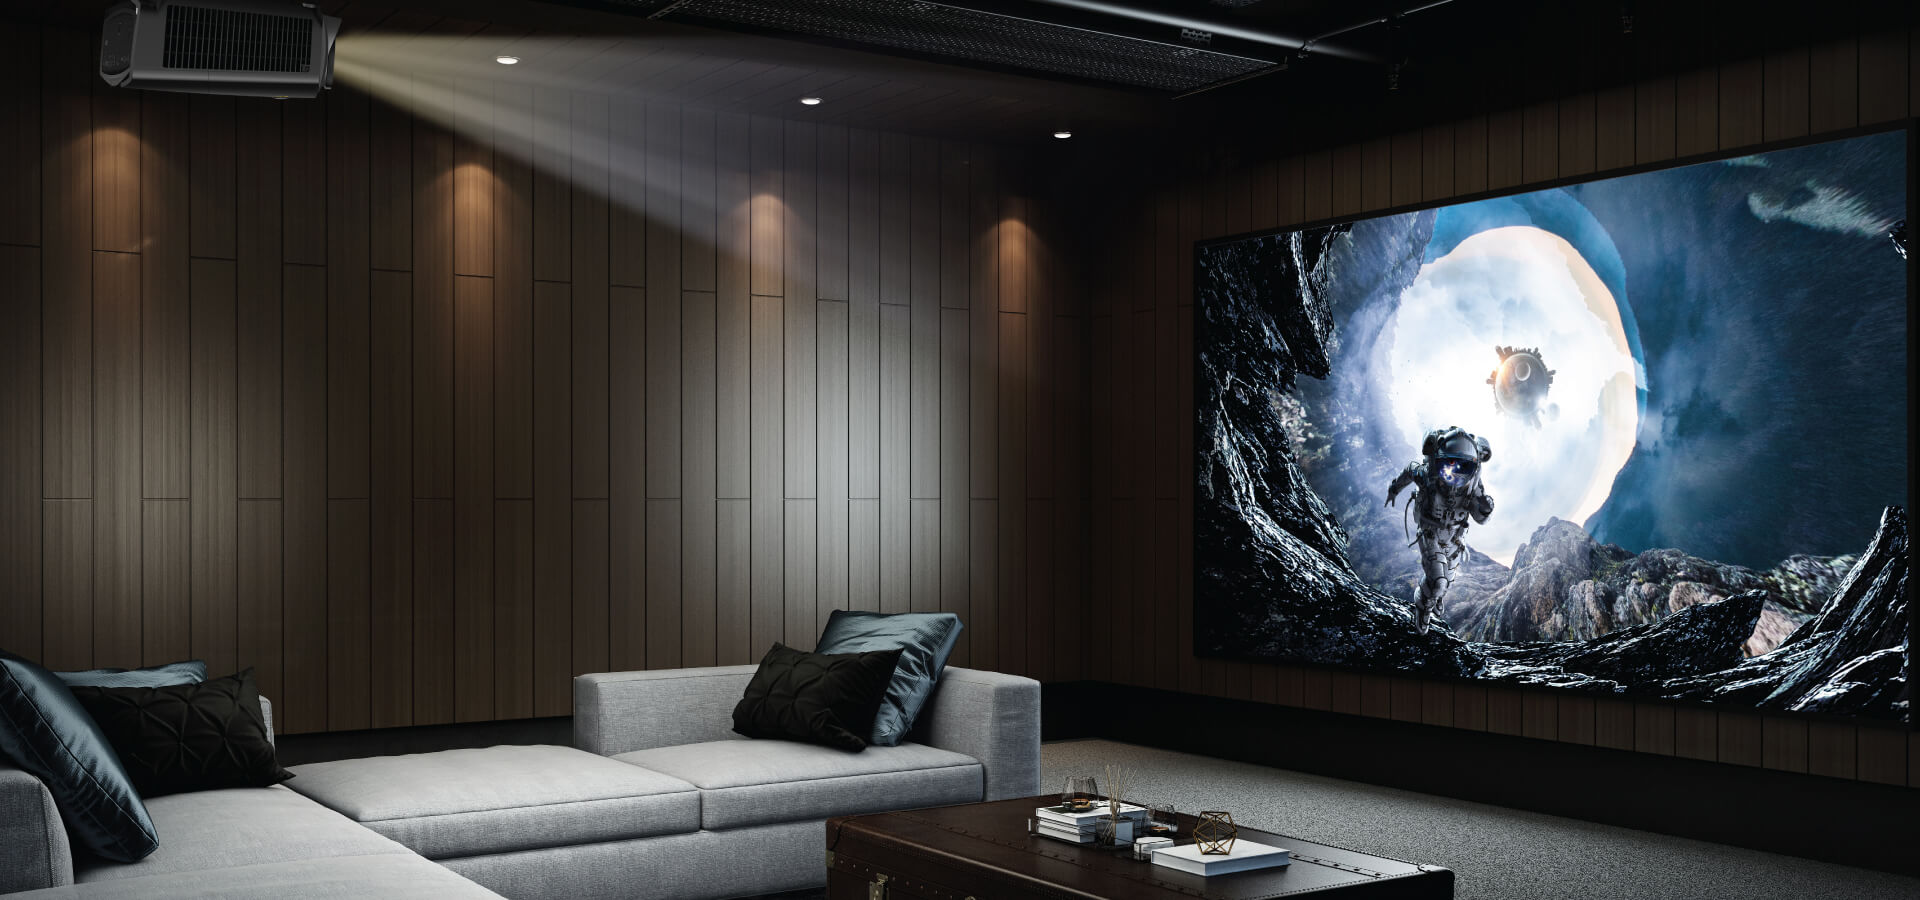 W2700 delivers the highest level of image accuracy to satisfy cinema fanatics taste